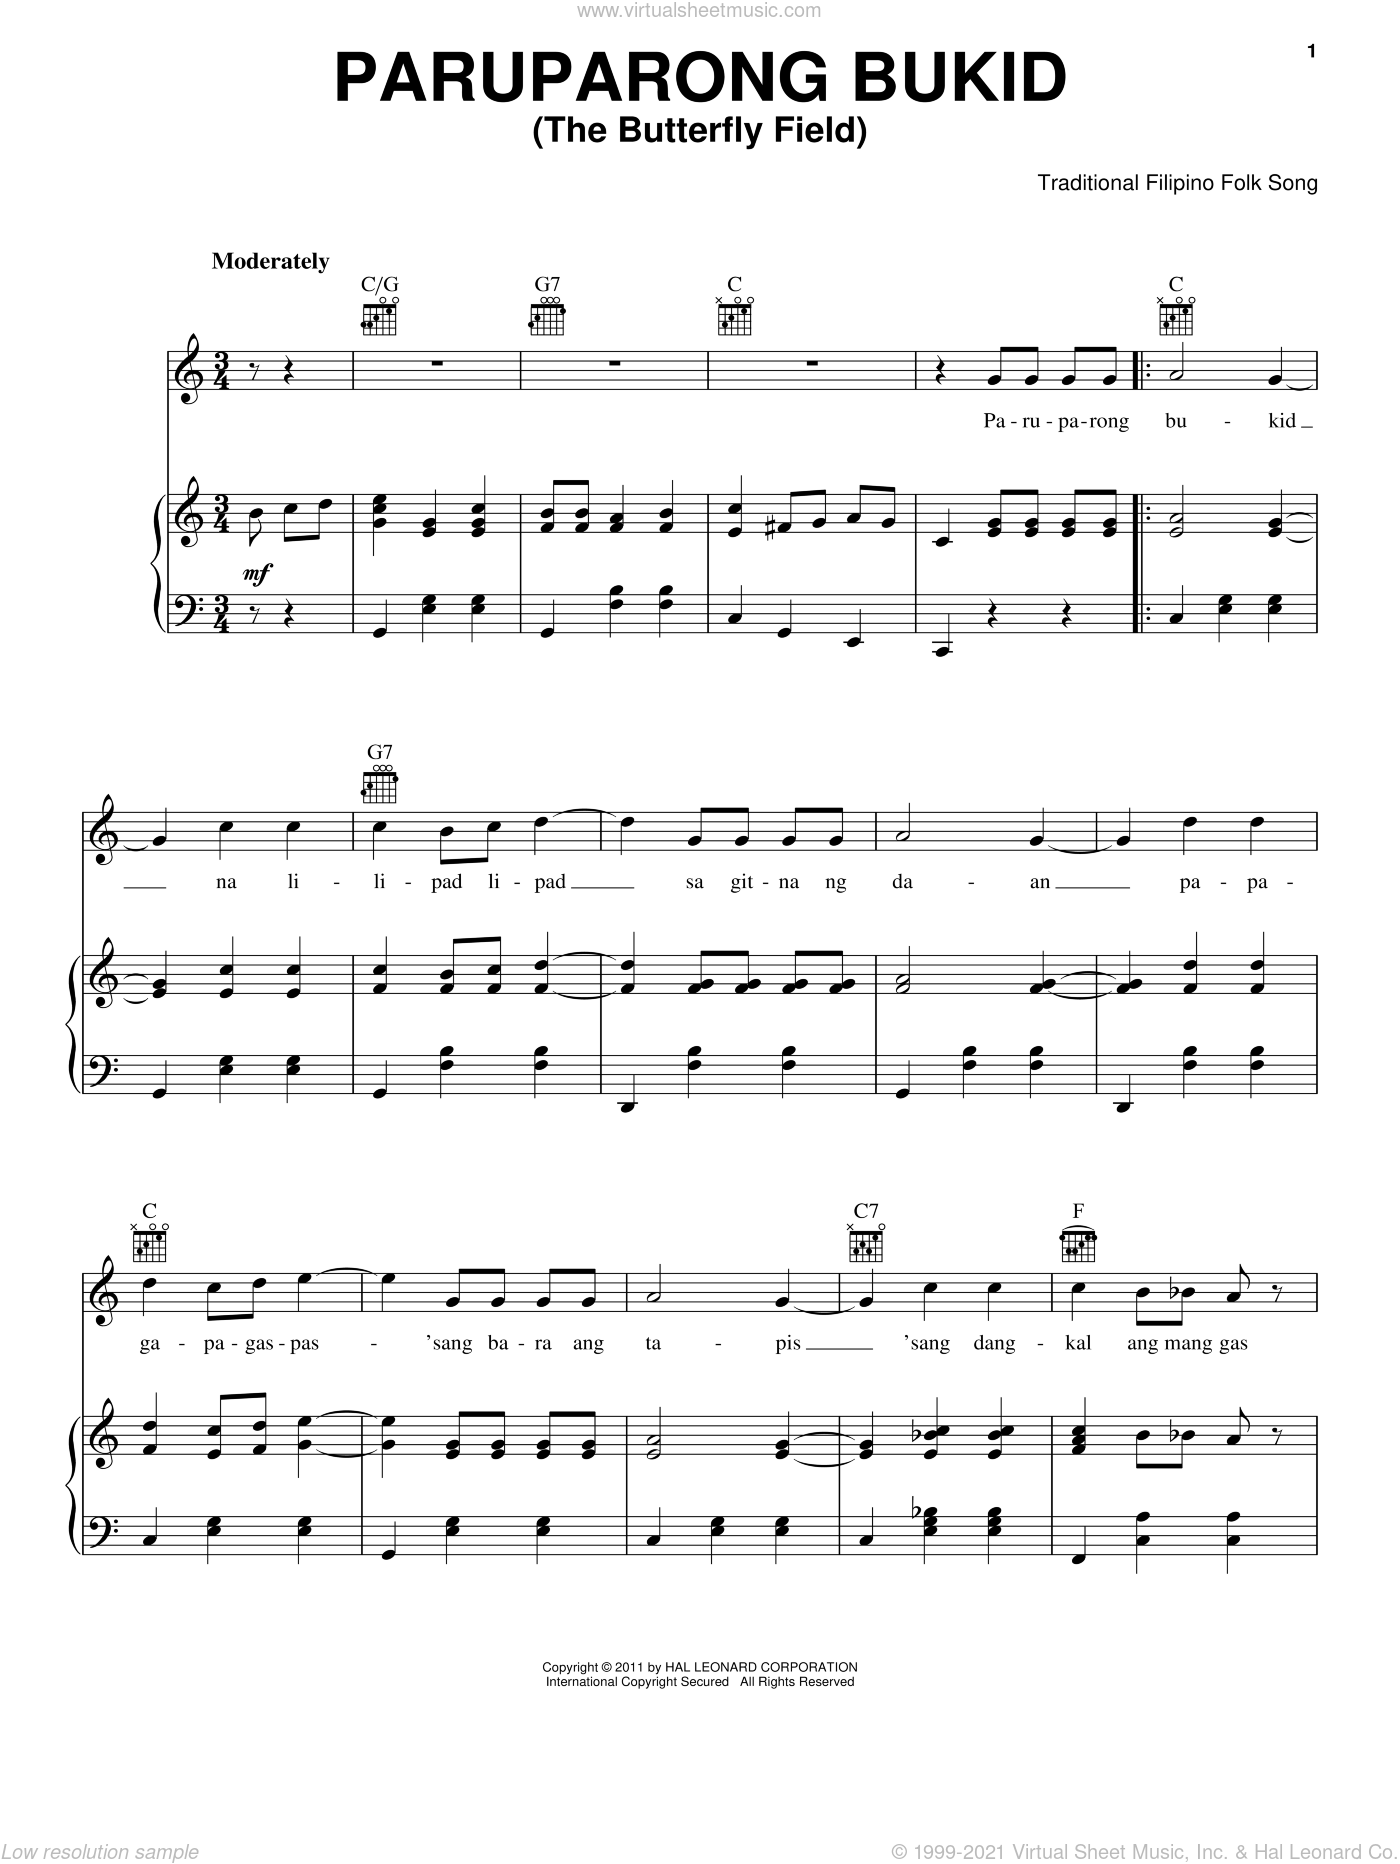 Song - Paruparong Bukid (The Butterfly Field) sheet music for voice